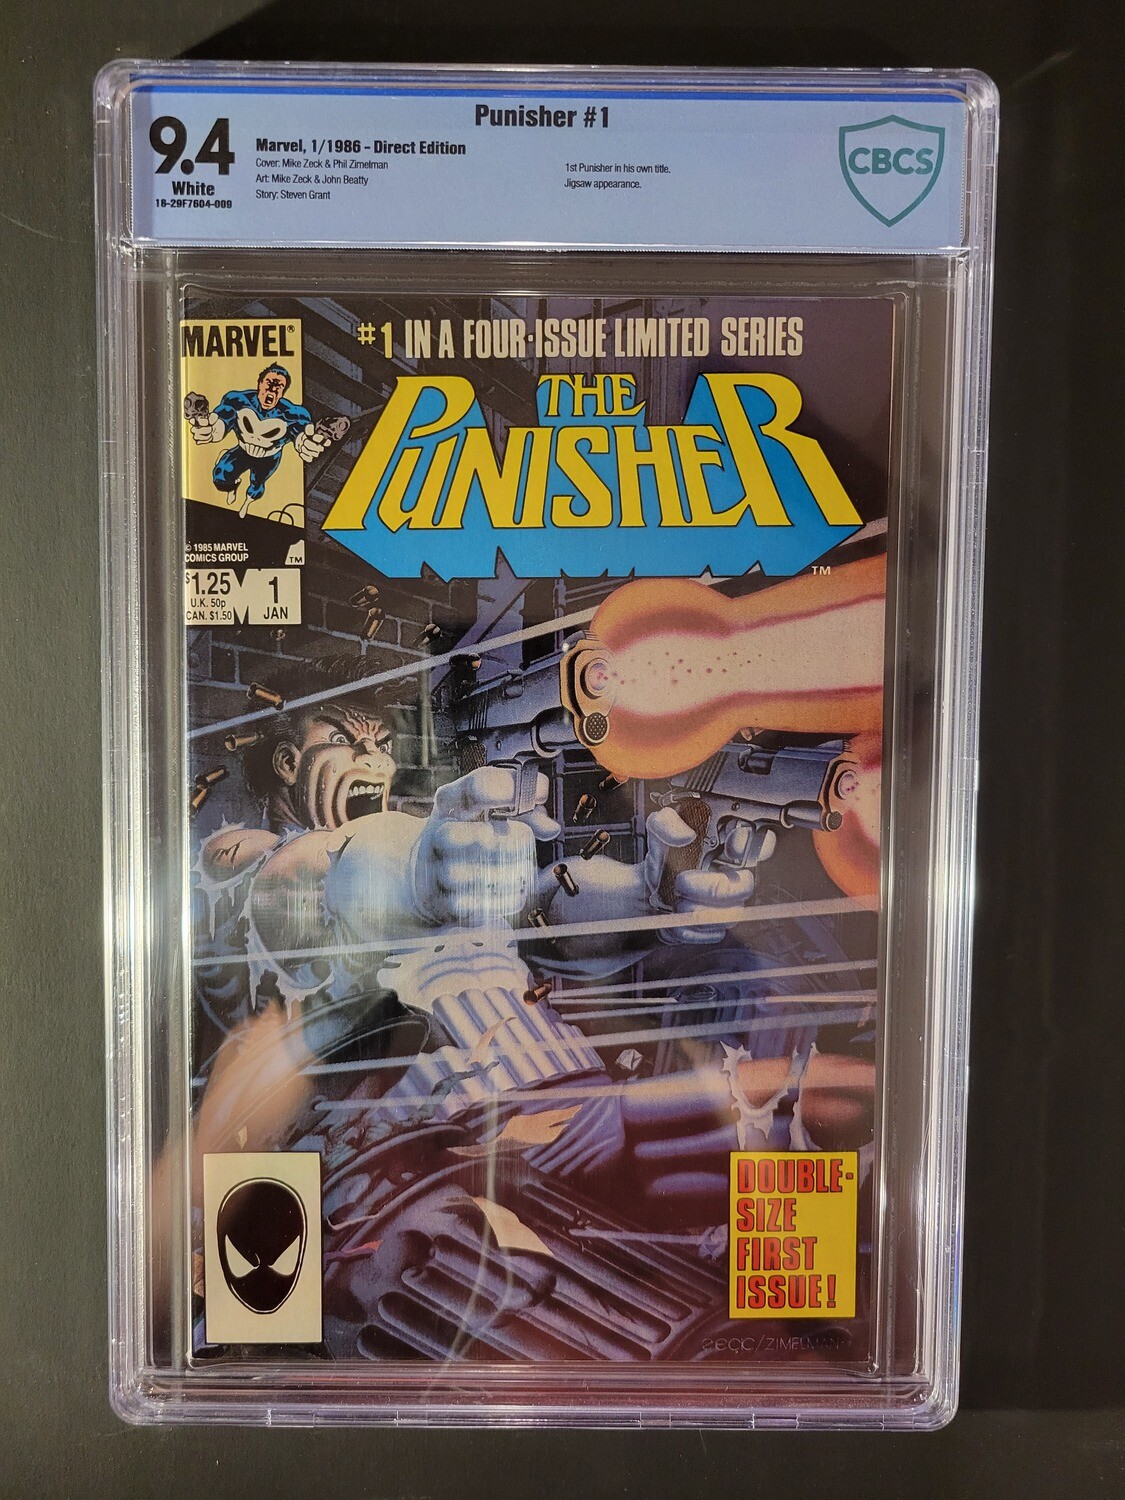 Punisher #1 CBCS 9.4 - 1st appearance of Punisher in his own title